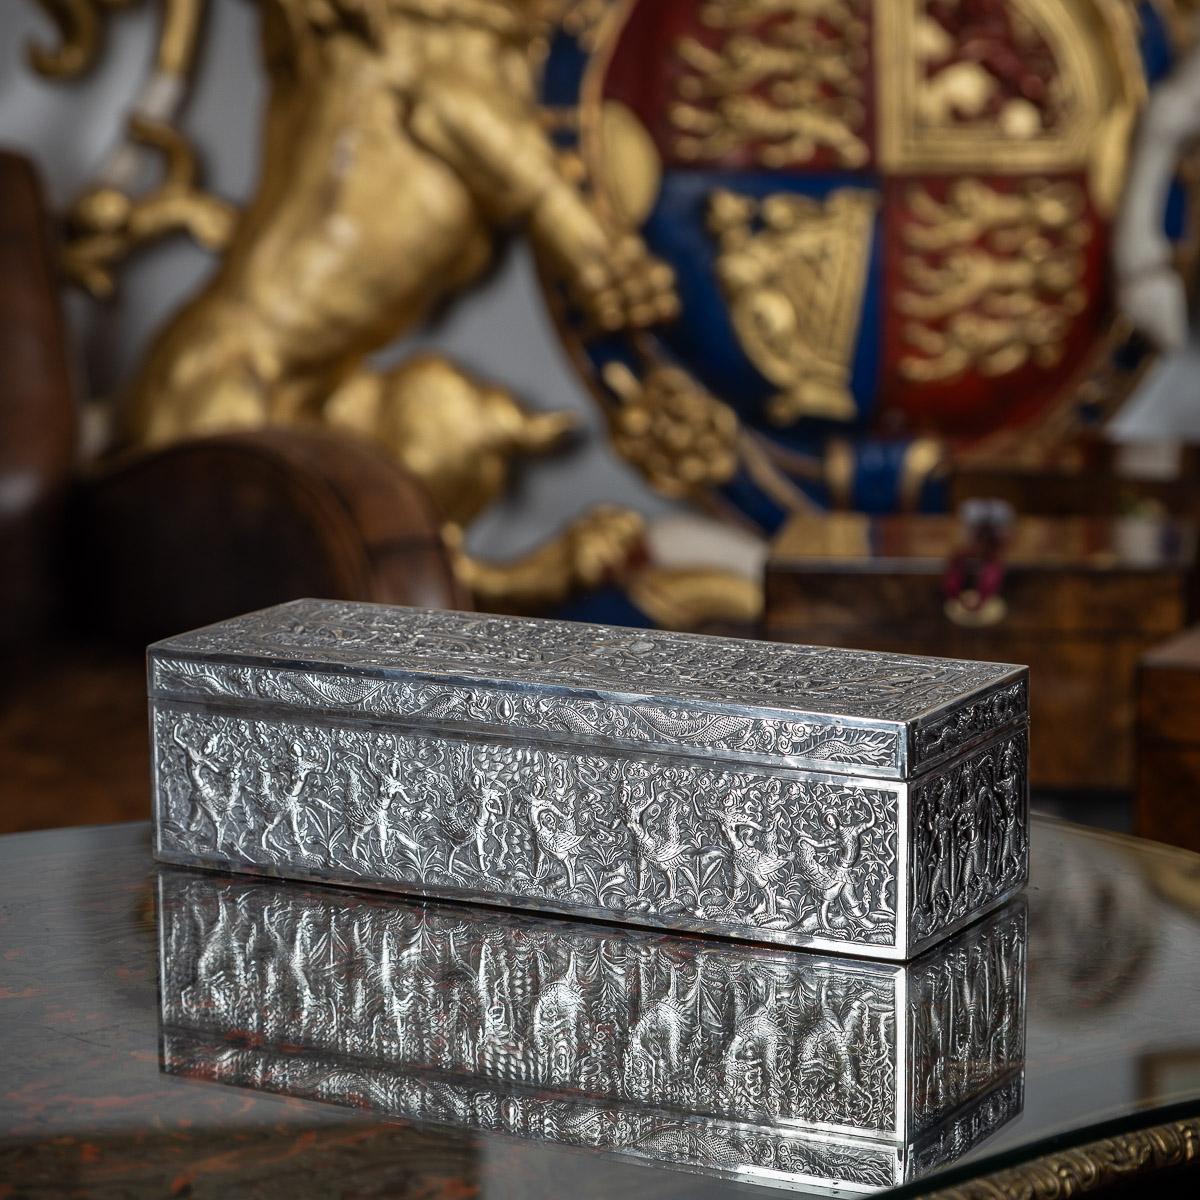 Antique late 19th Century rare Chinese export solid silver large casket made for the Thai market, crafted in an elongated rectangular form, the lid is intricately embossed with a scene from the Ramakien, a Thai rendition of the Hindu epic Ramayana.